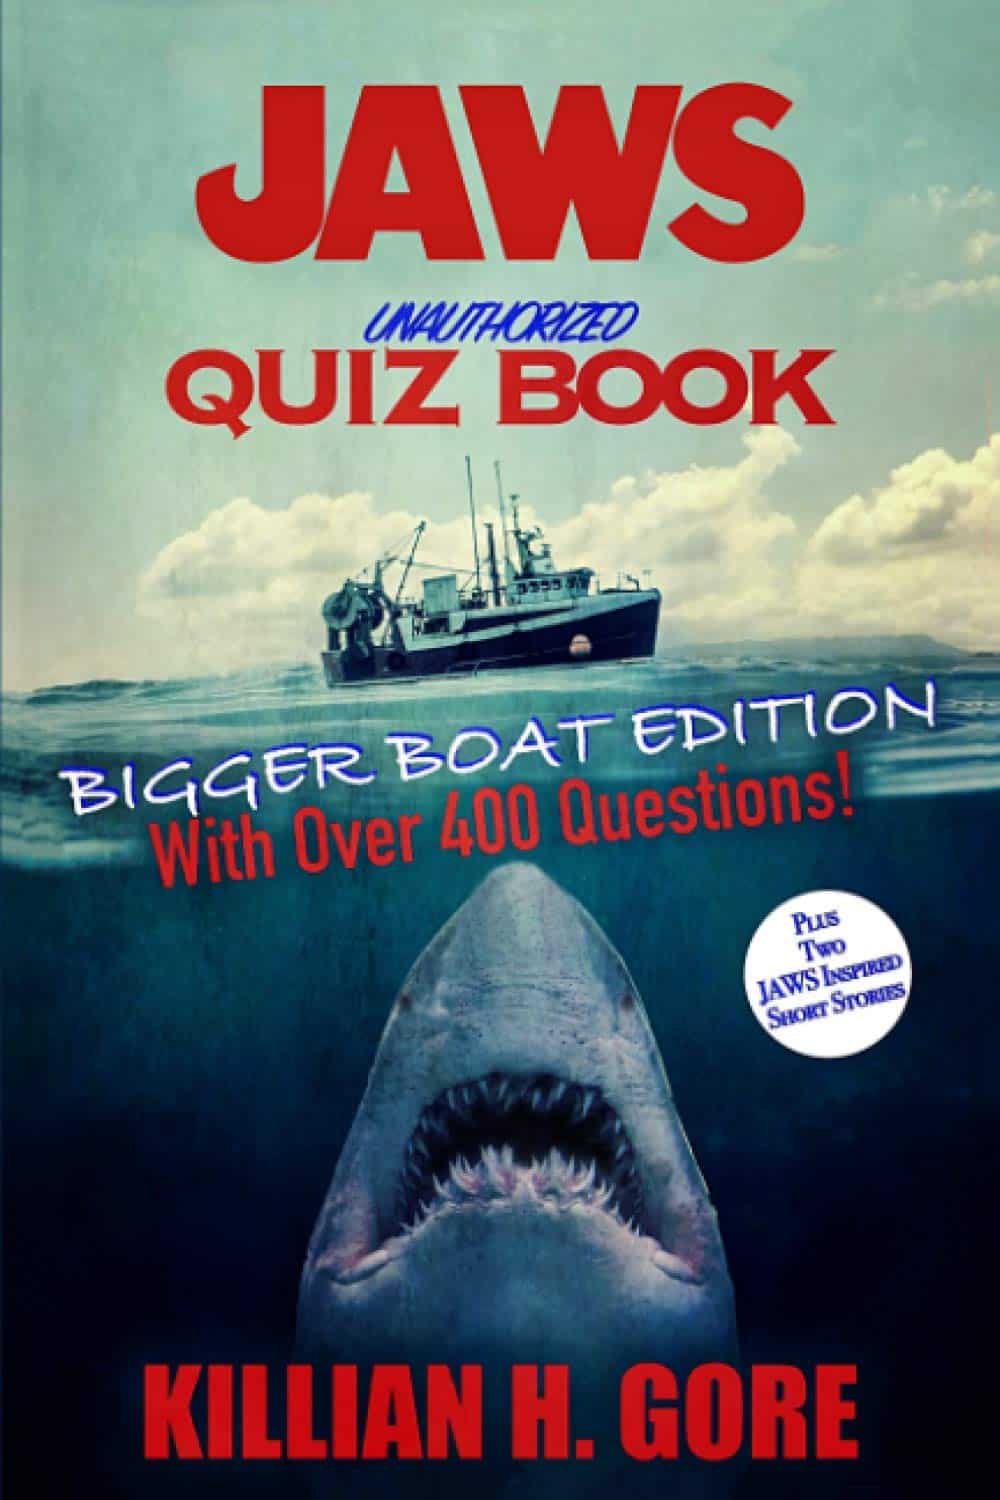 A book cover with a shark's mouth and a boat in the background Description automatically generated